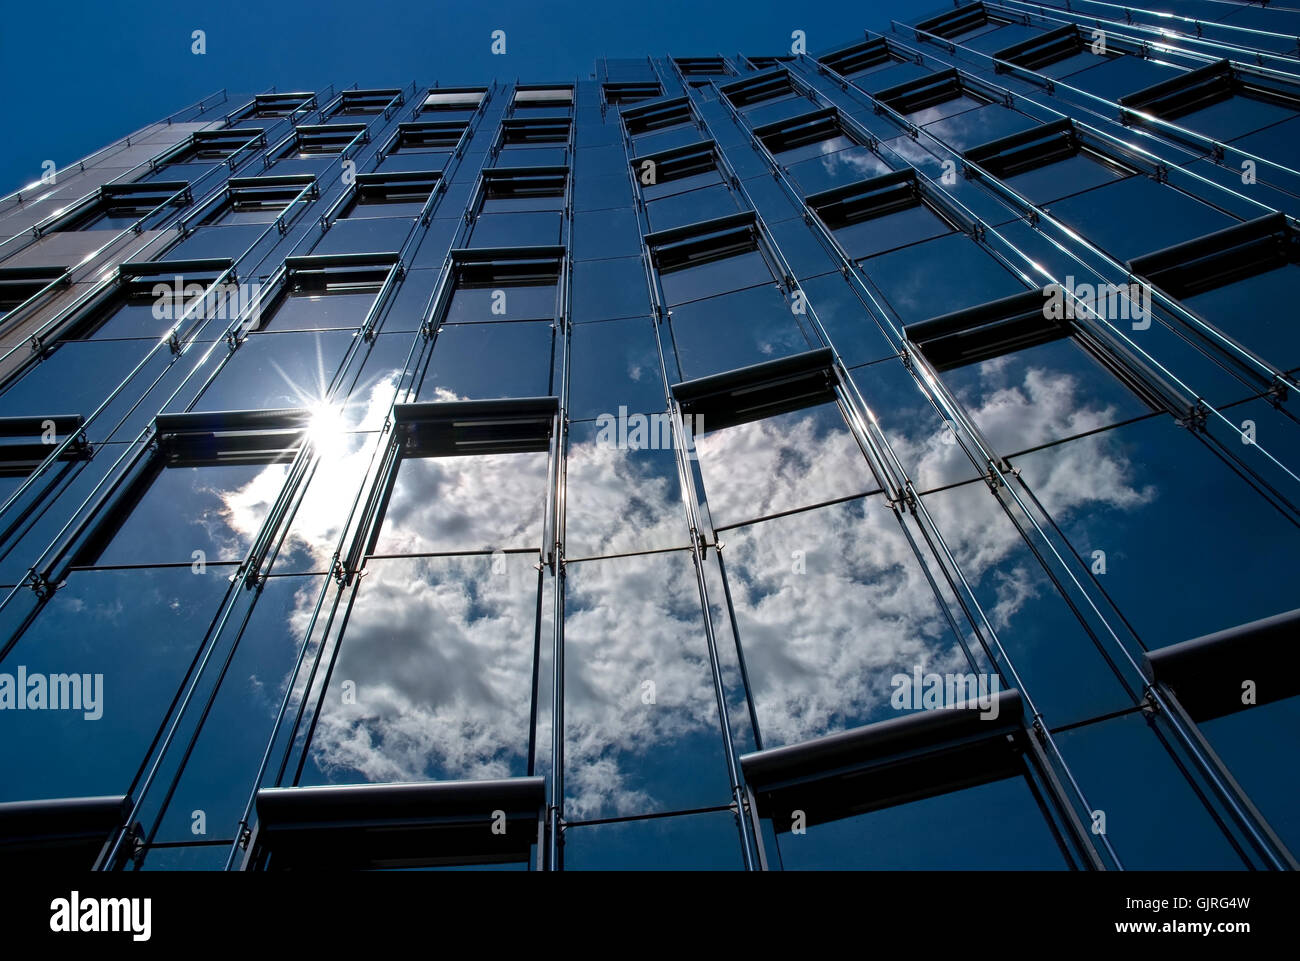 windows with clouds and sun image Stock Photo